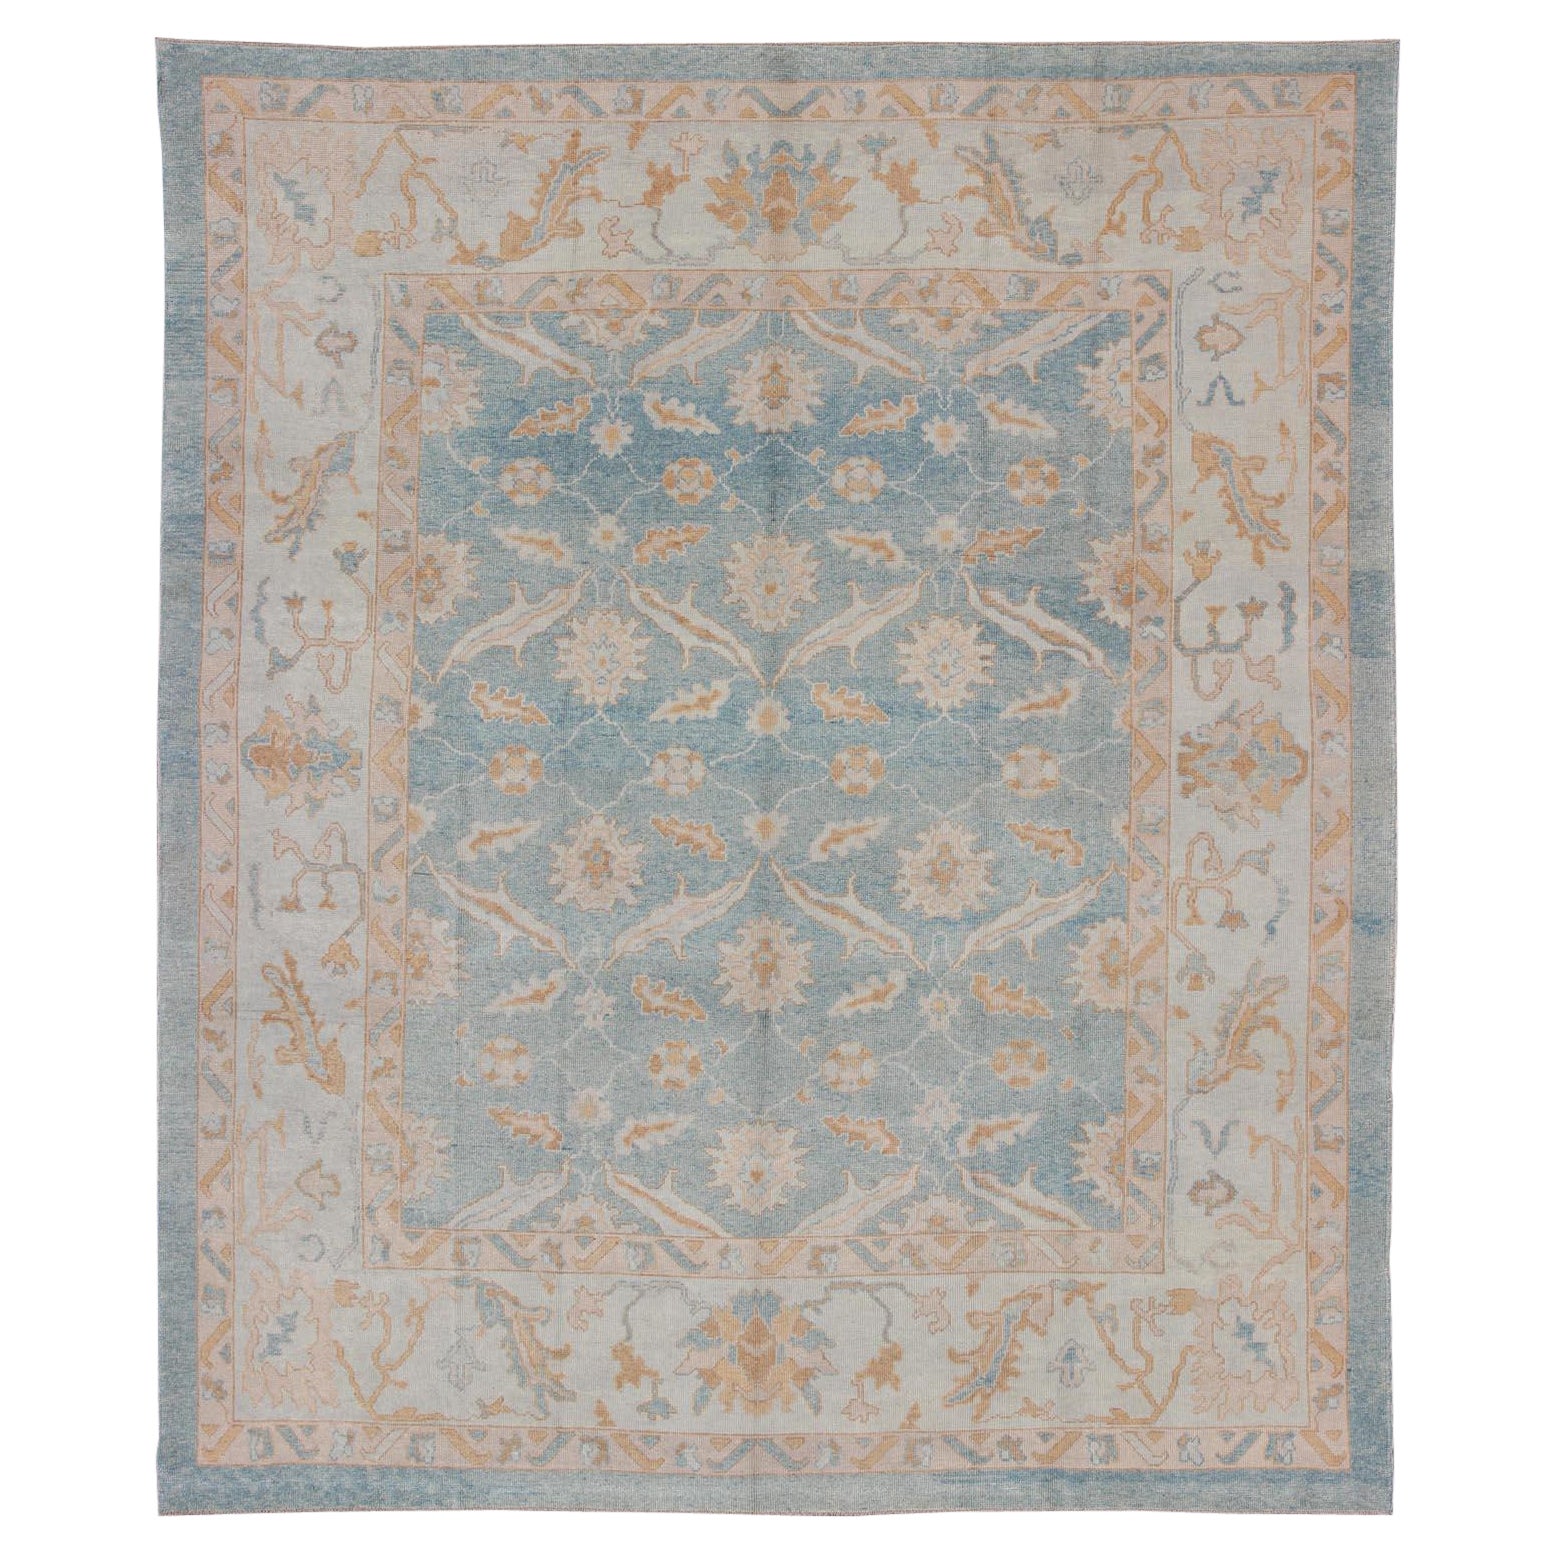 Square Turkish Oushak Rug in Light Blue, Light Brown, Salmon, Silver & Tan For Sale